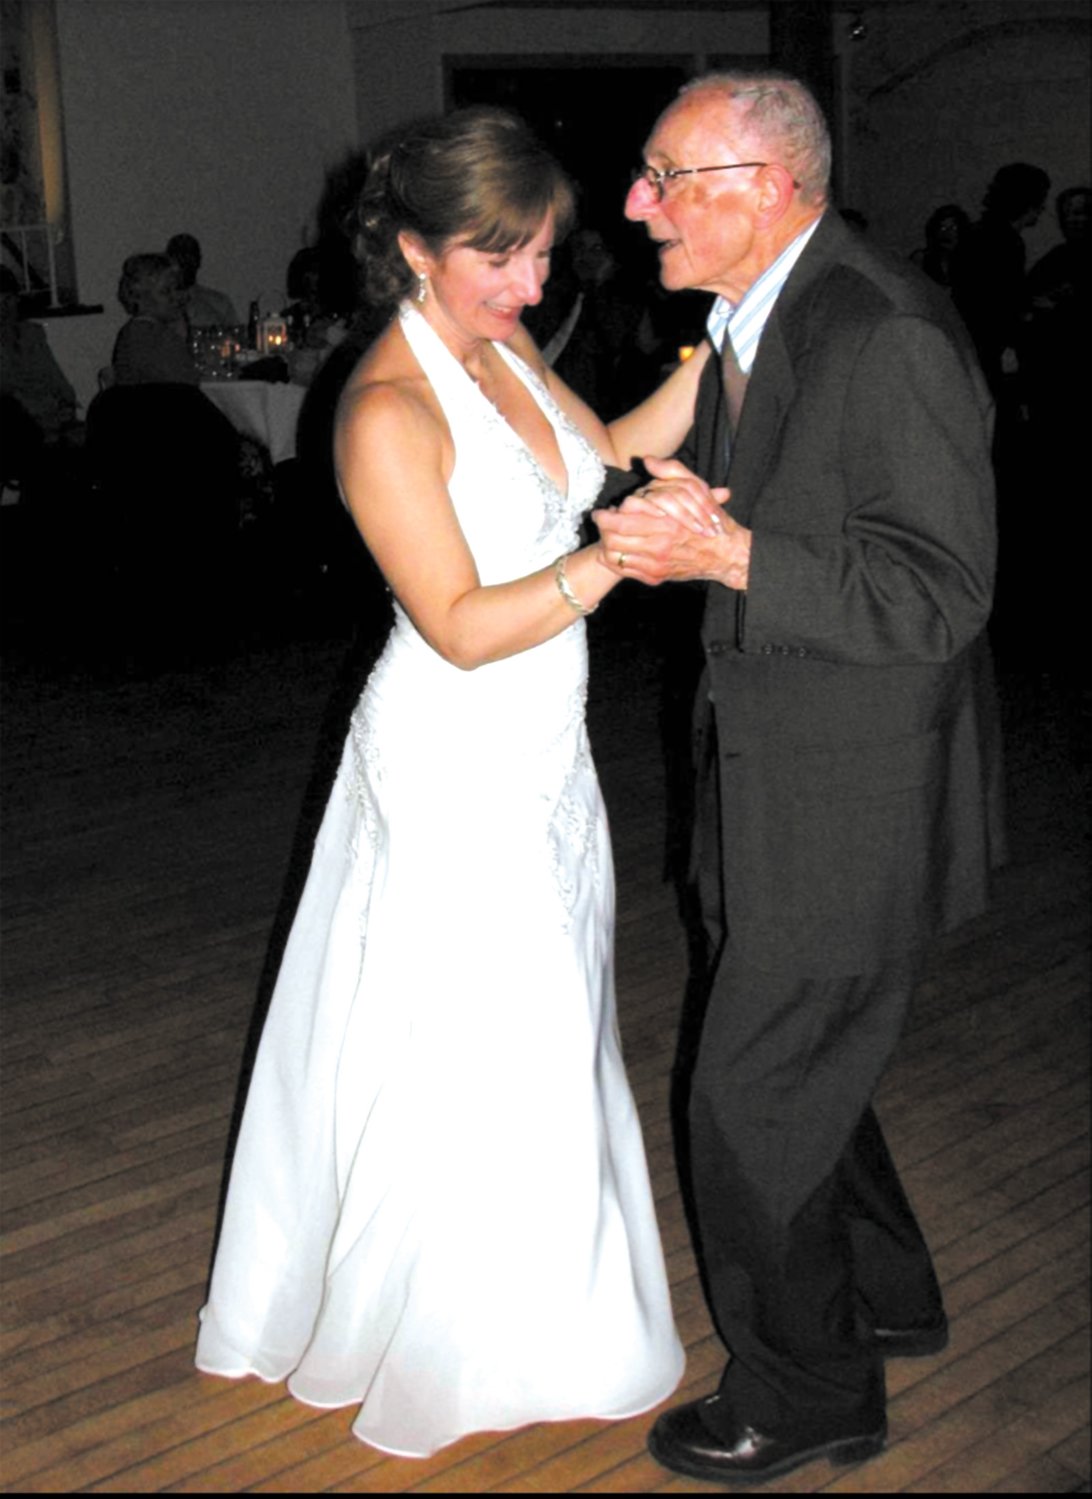 OUT TO WIN PEOPLE’S CHOICE AWARD: Terri Brophy, Vice President of Human Resources at the Greenwood Credit Union, has set her goal on winning the People’s Choice Award in the Dancing with the Stars of Mentor RI Gala on March 31, 2023. She says her only real dance experience is dancing with her dad. Here she dances with her 93 year-old father and mentor at her wedding where he asked if, “they could slow down.”